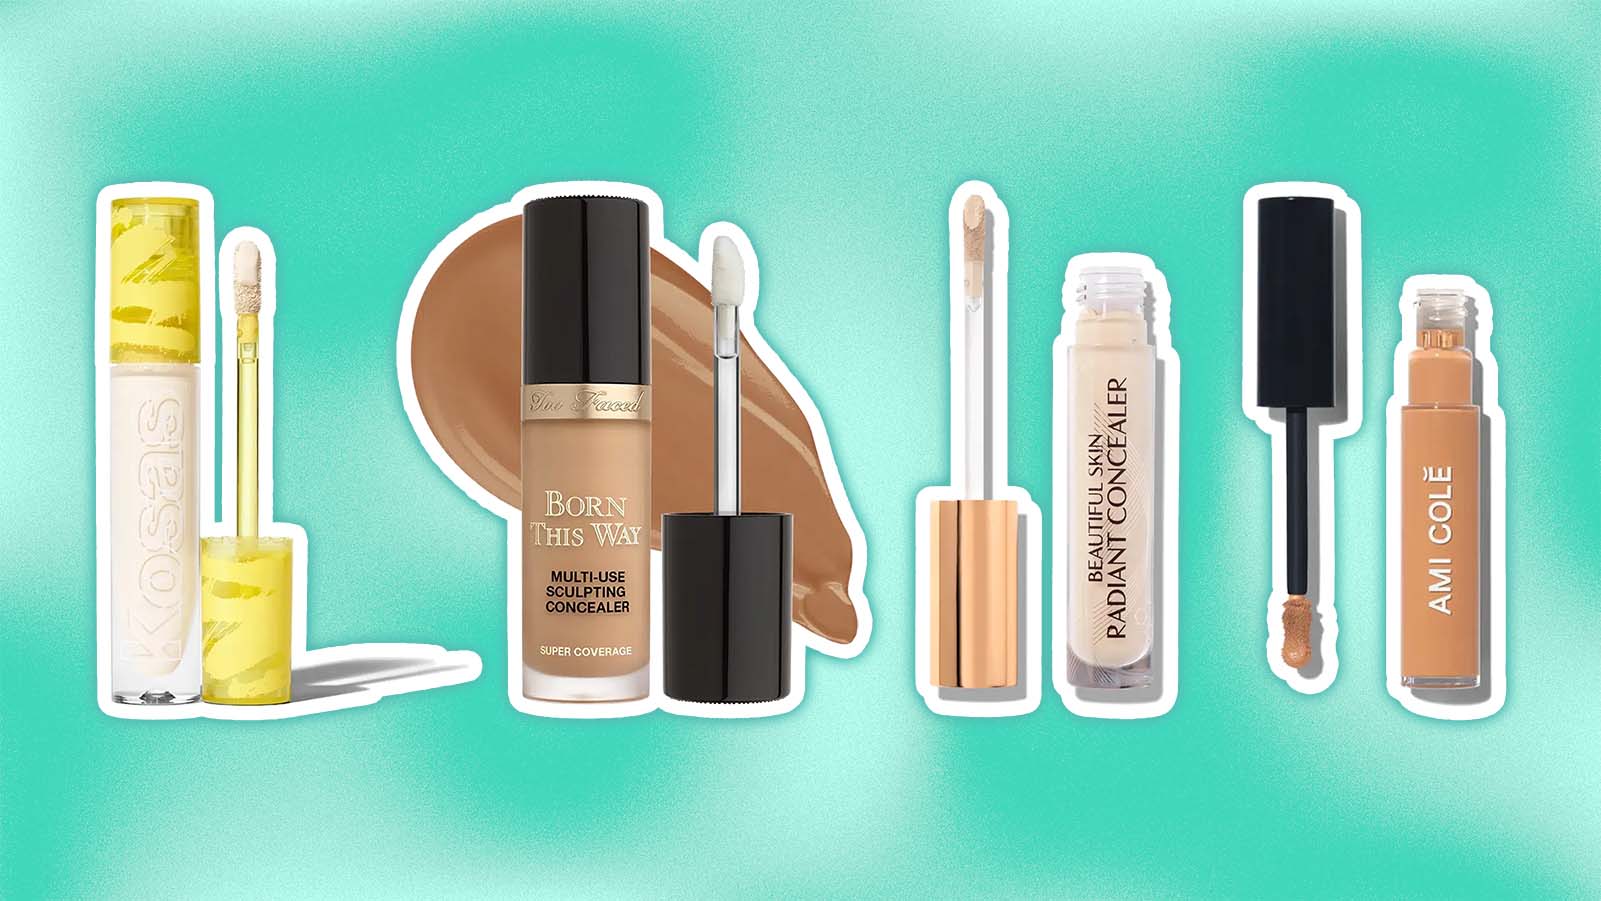 Quiet Concealing — The Best New Concealer to buy for 2023 is Chanel's  Sublimage Concealing Eye Care